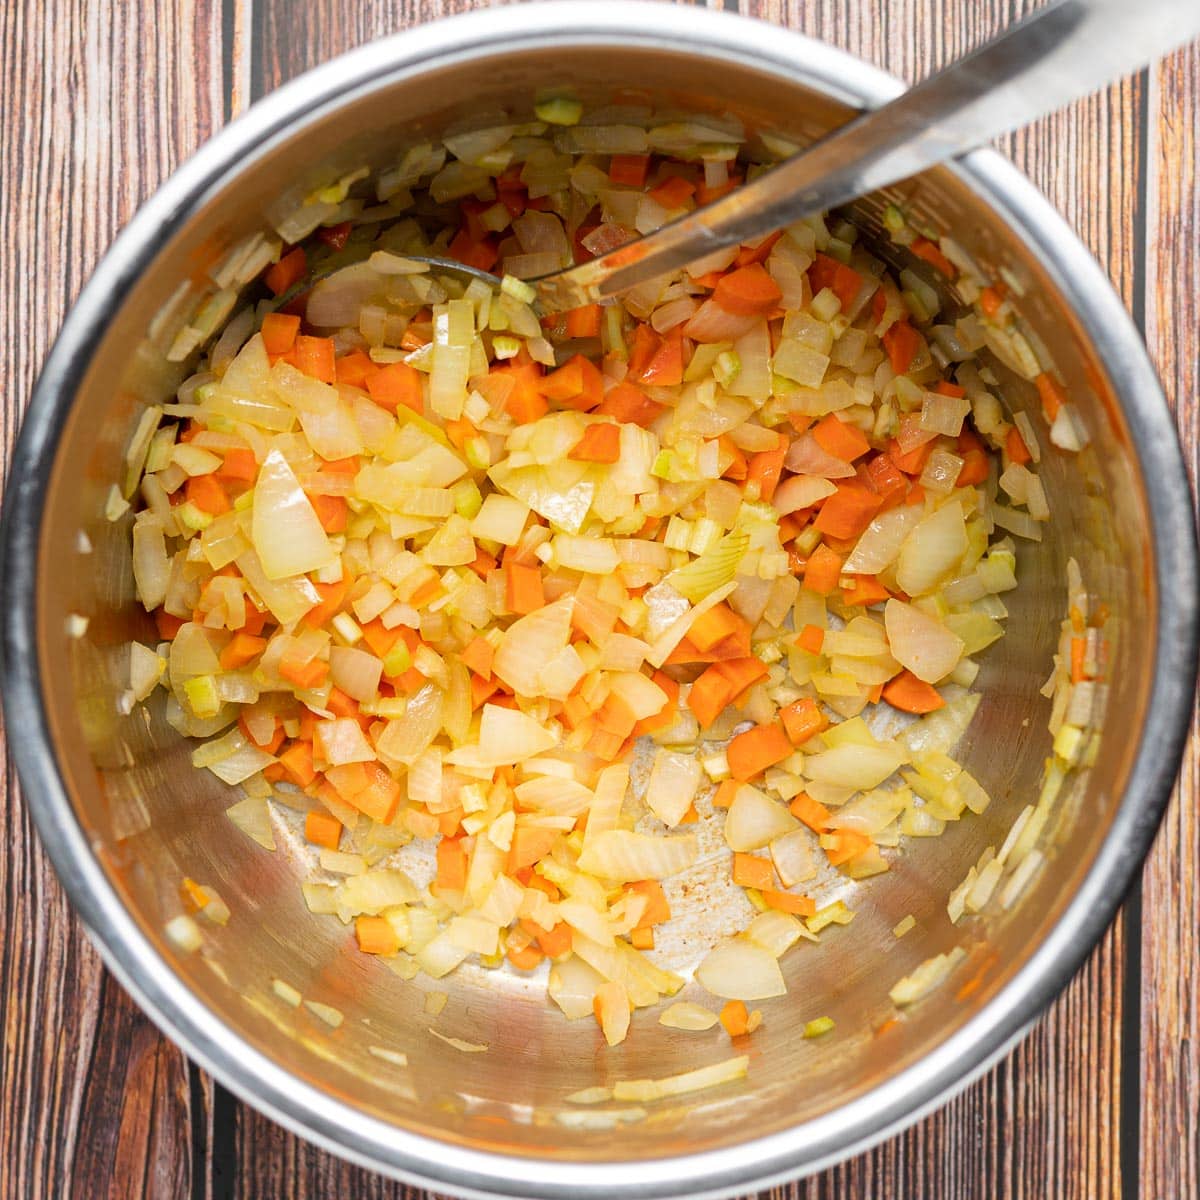 sautéed onions, carrot and celery in an Instant Pot